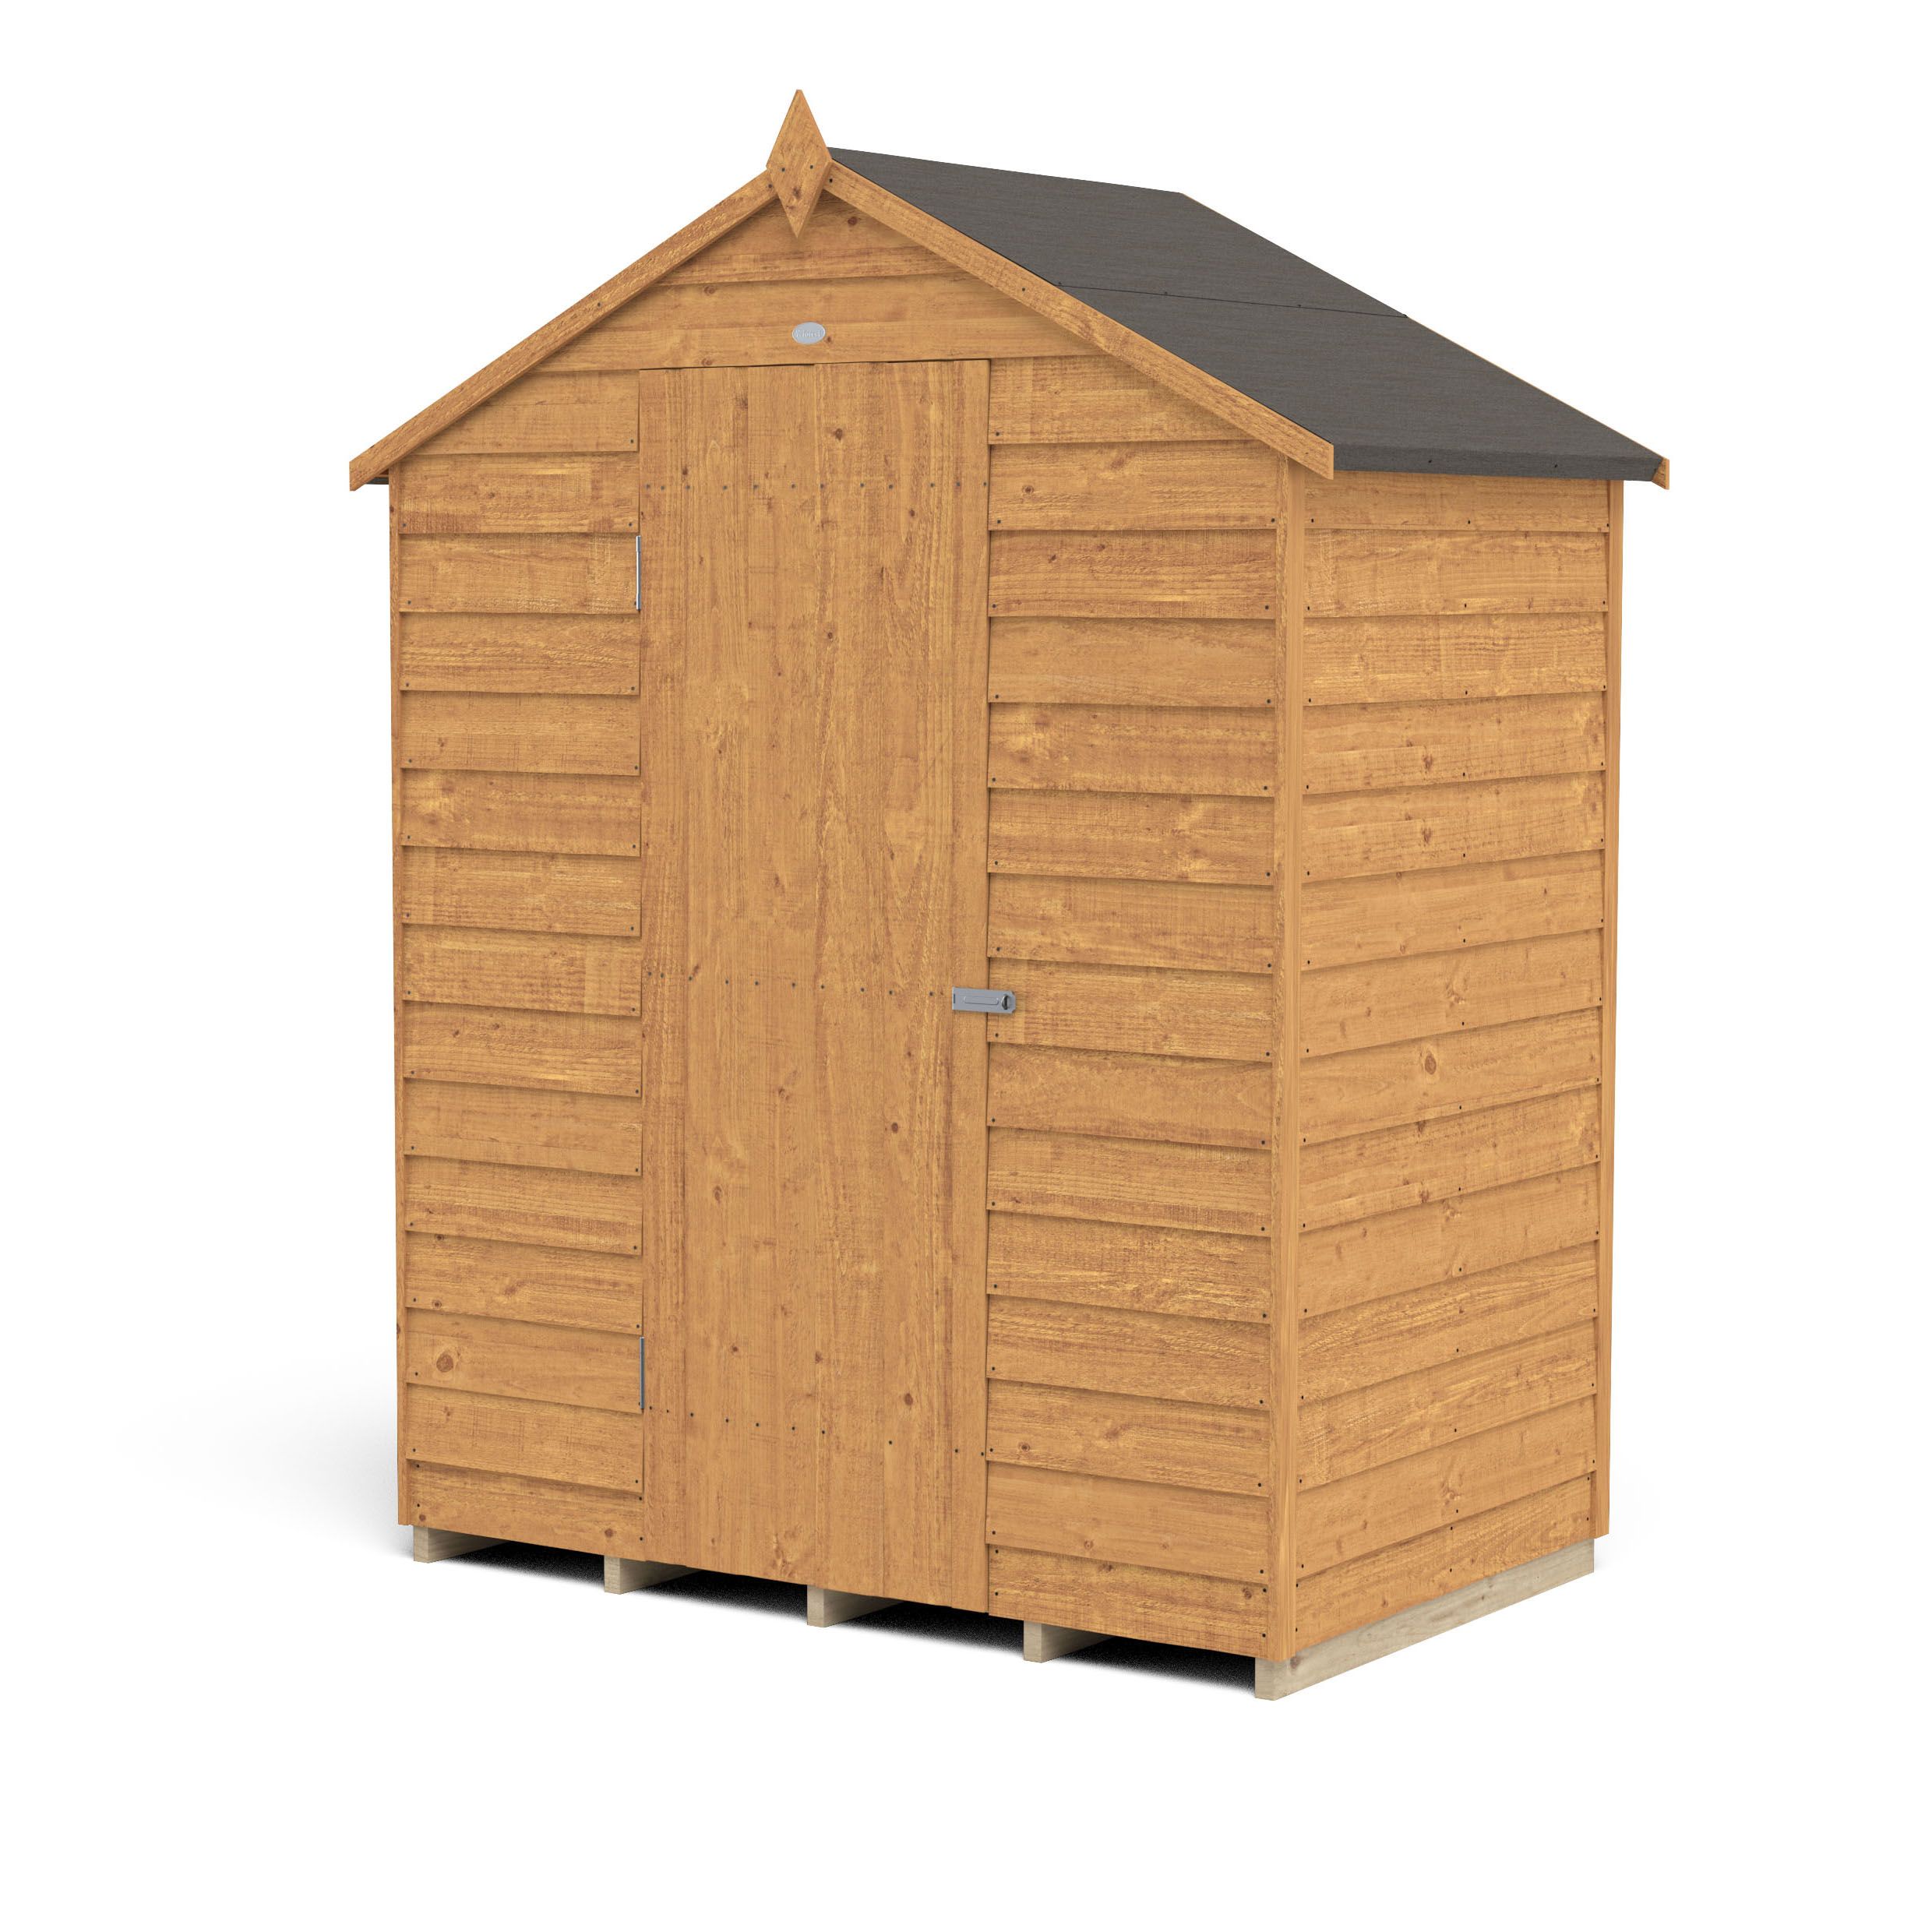 Forest Garden Overlap 5x3 ft Apex Wooden Dip treated Shed with floor (Base included)